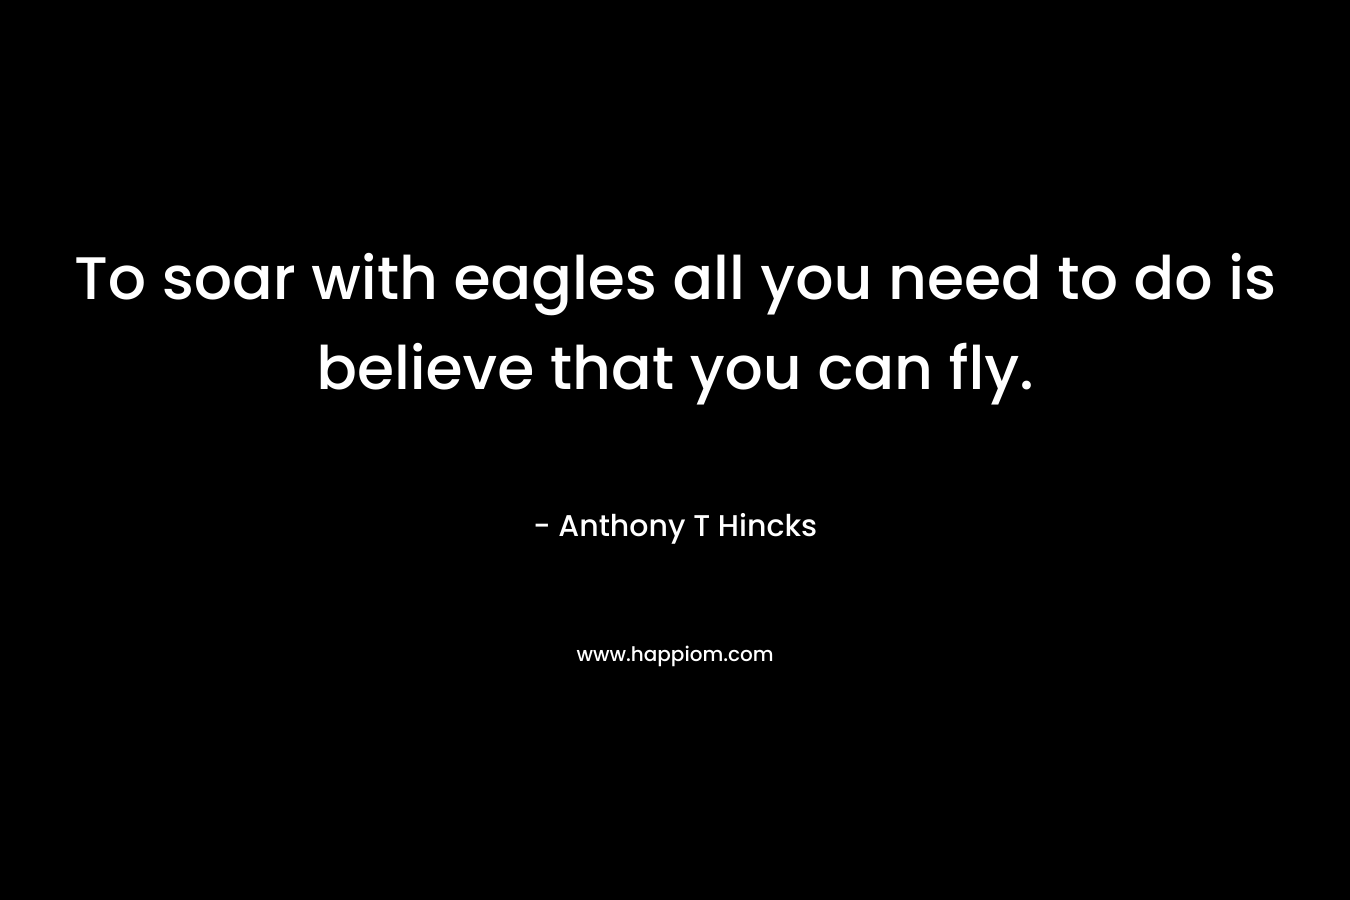 To soar with eagles all you need to do is believe that you can fly.